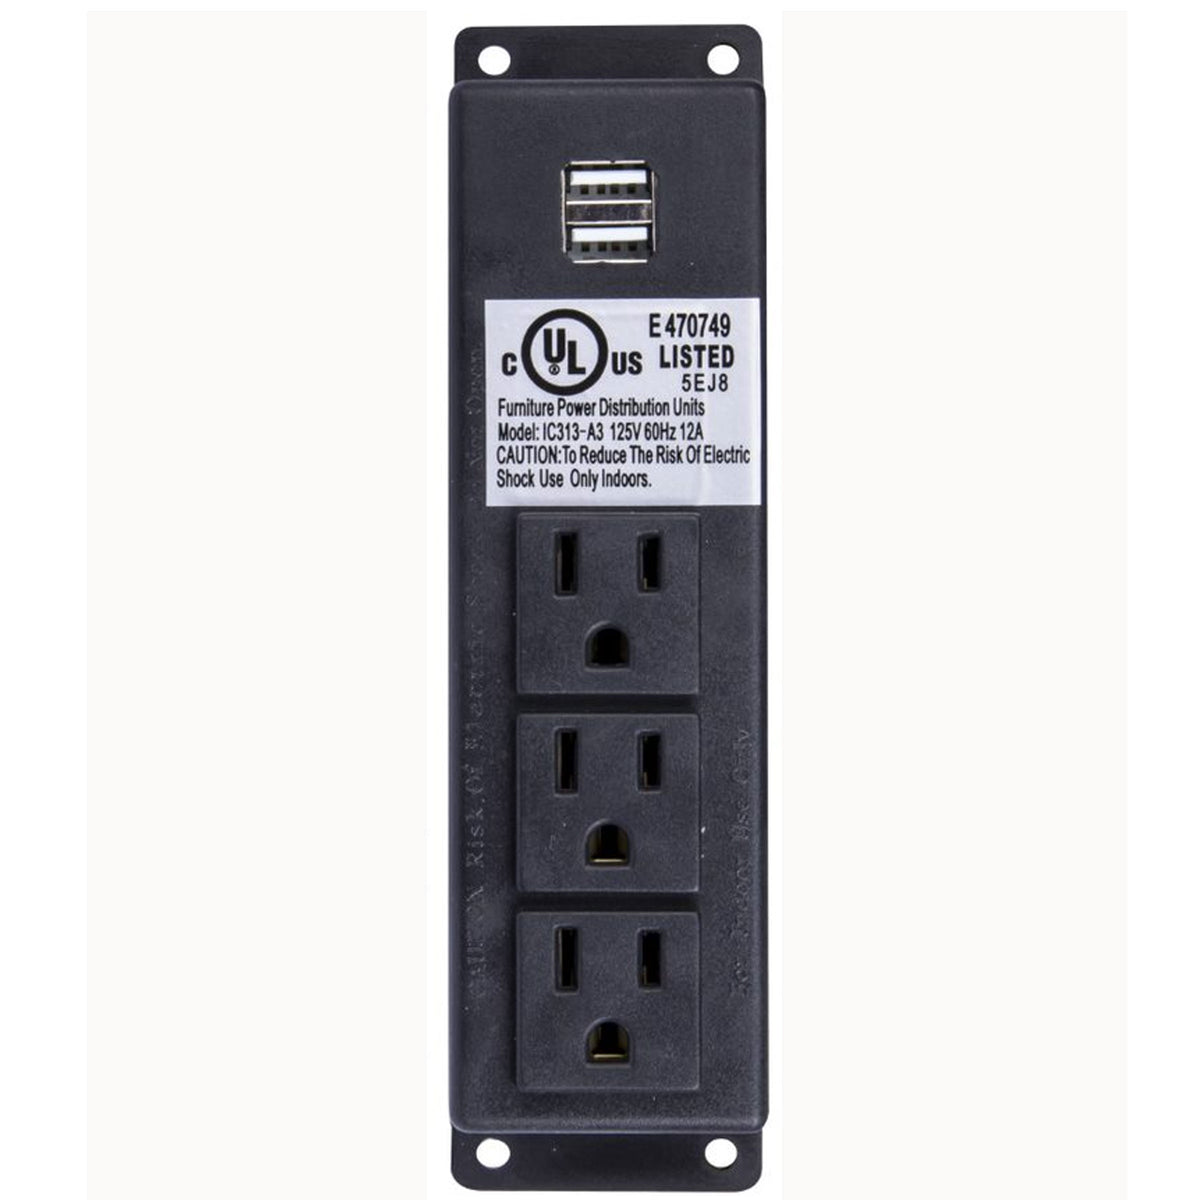 Factory-Installed Internal Electrical Outlet with USB.